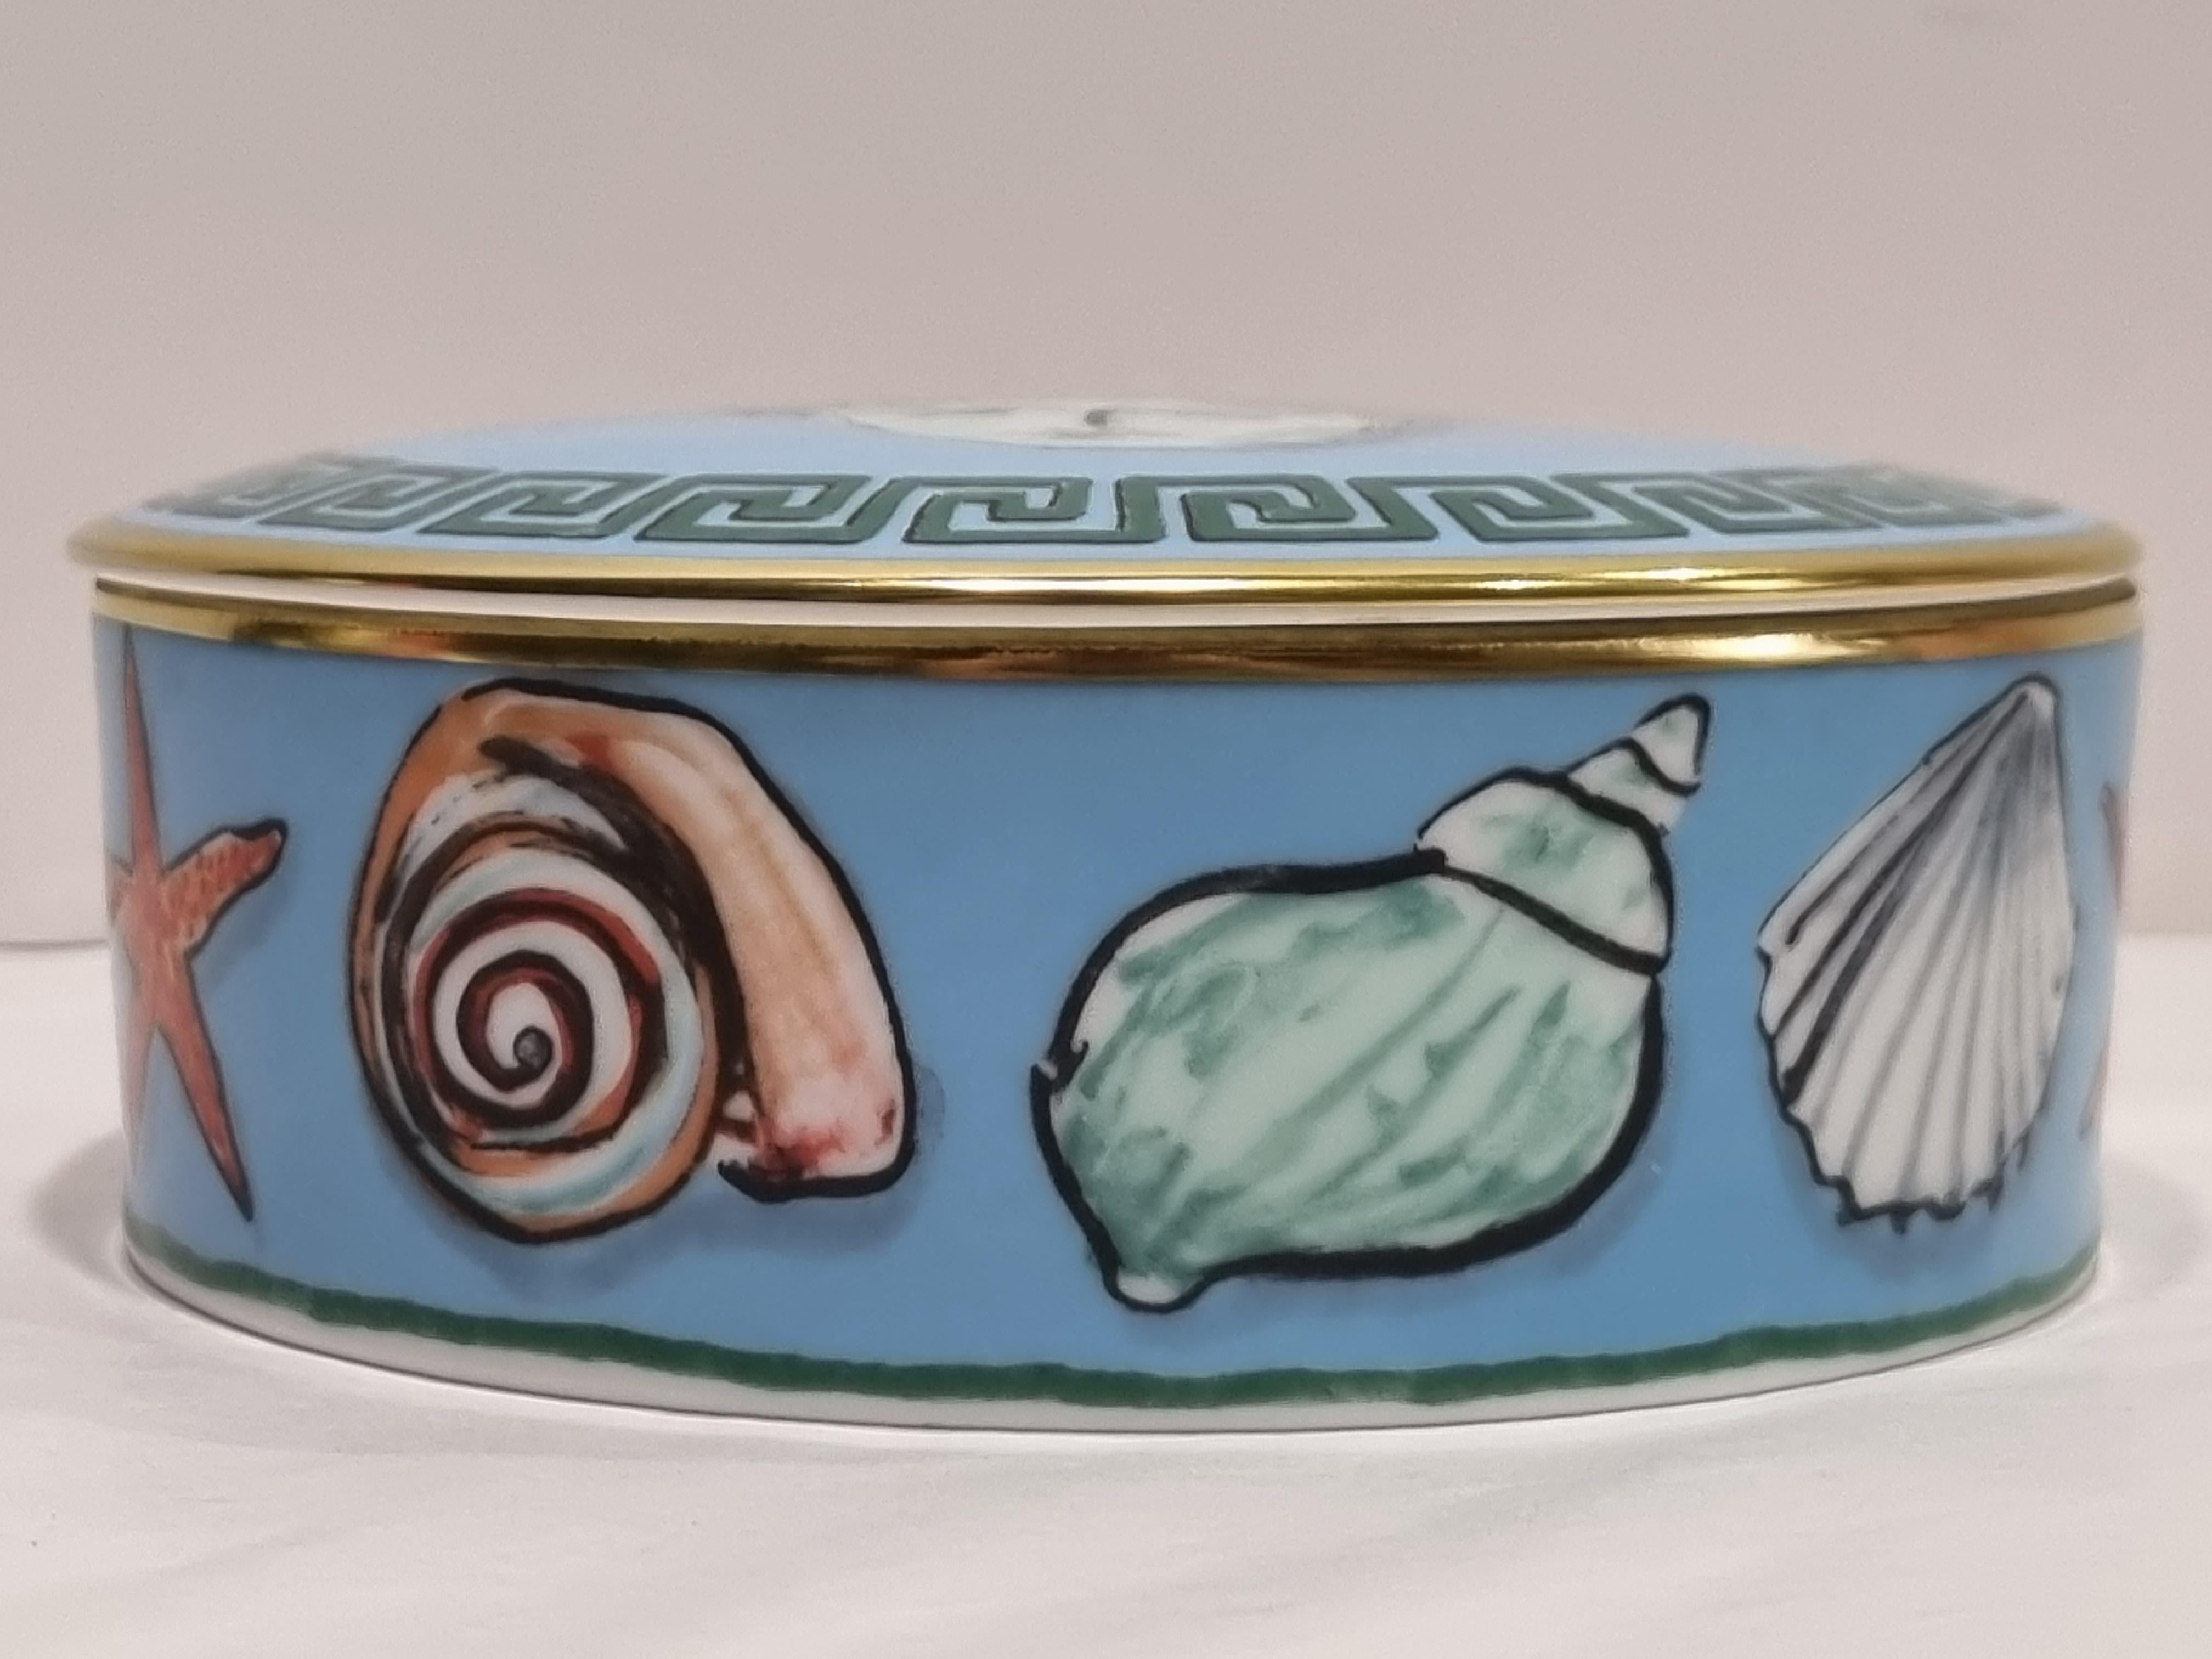 Sea Blue porcelain trinket box, a lustrous blue reminiscent of the depths of the sea. The Il viaggio di Nettuno collection. A pretty keepsake box, 13 cm in diameter and embellished with gold trim and with works of art by English designer Luke Edward